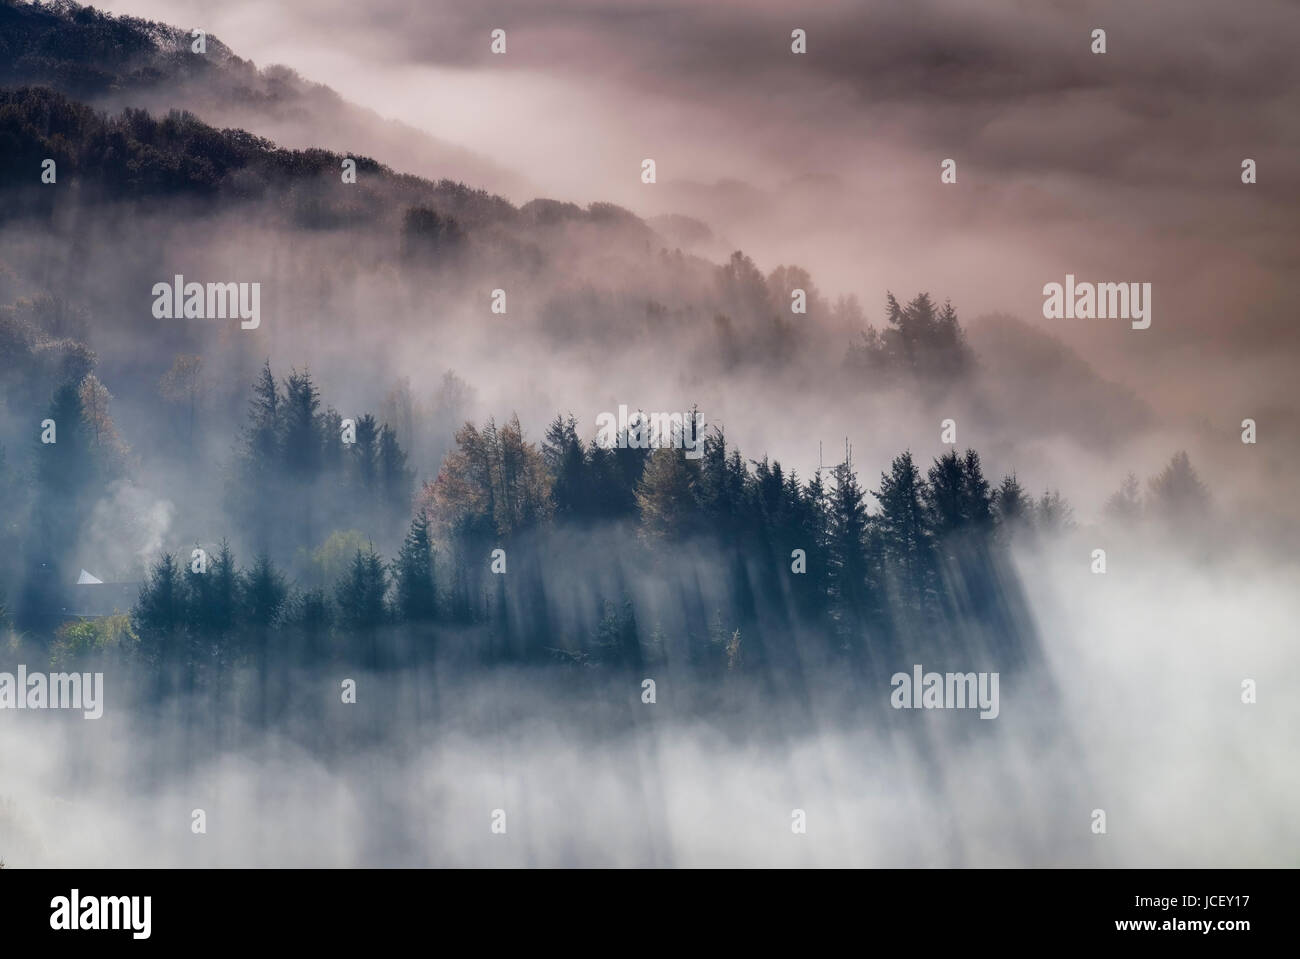 Mist and Fog surround the Gwydir Forest at dawn, Capel Curig, Snowdonia National Park, North Wales, UK Stock Photo